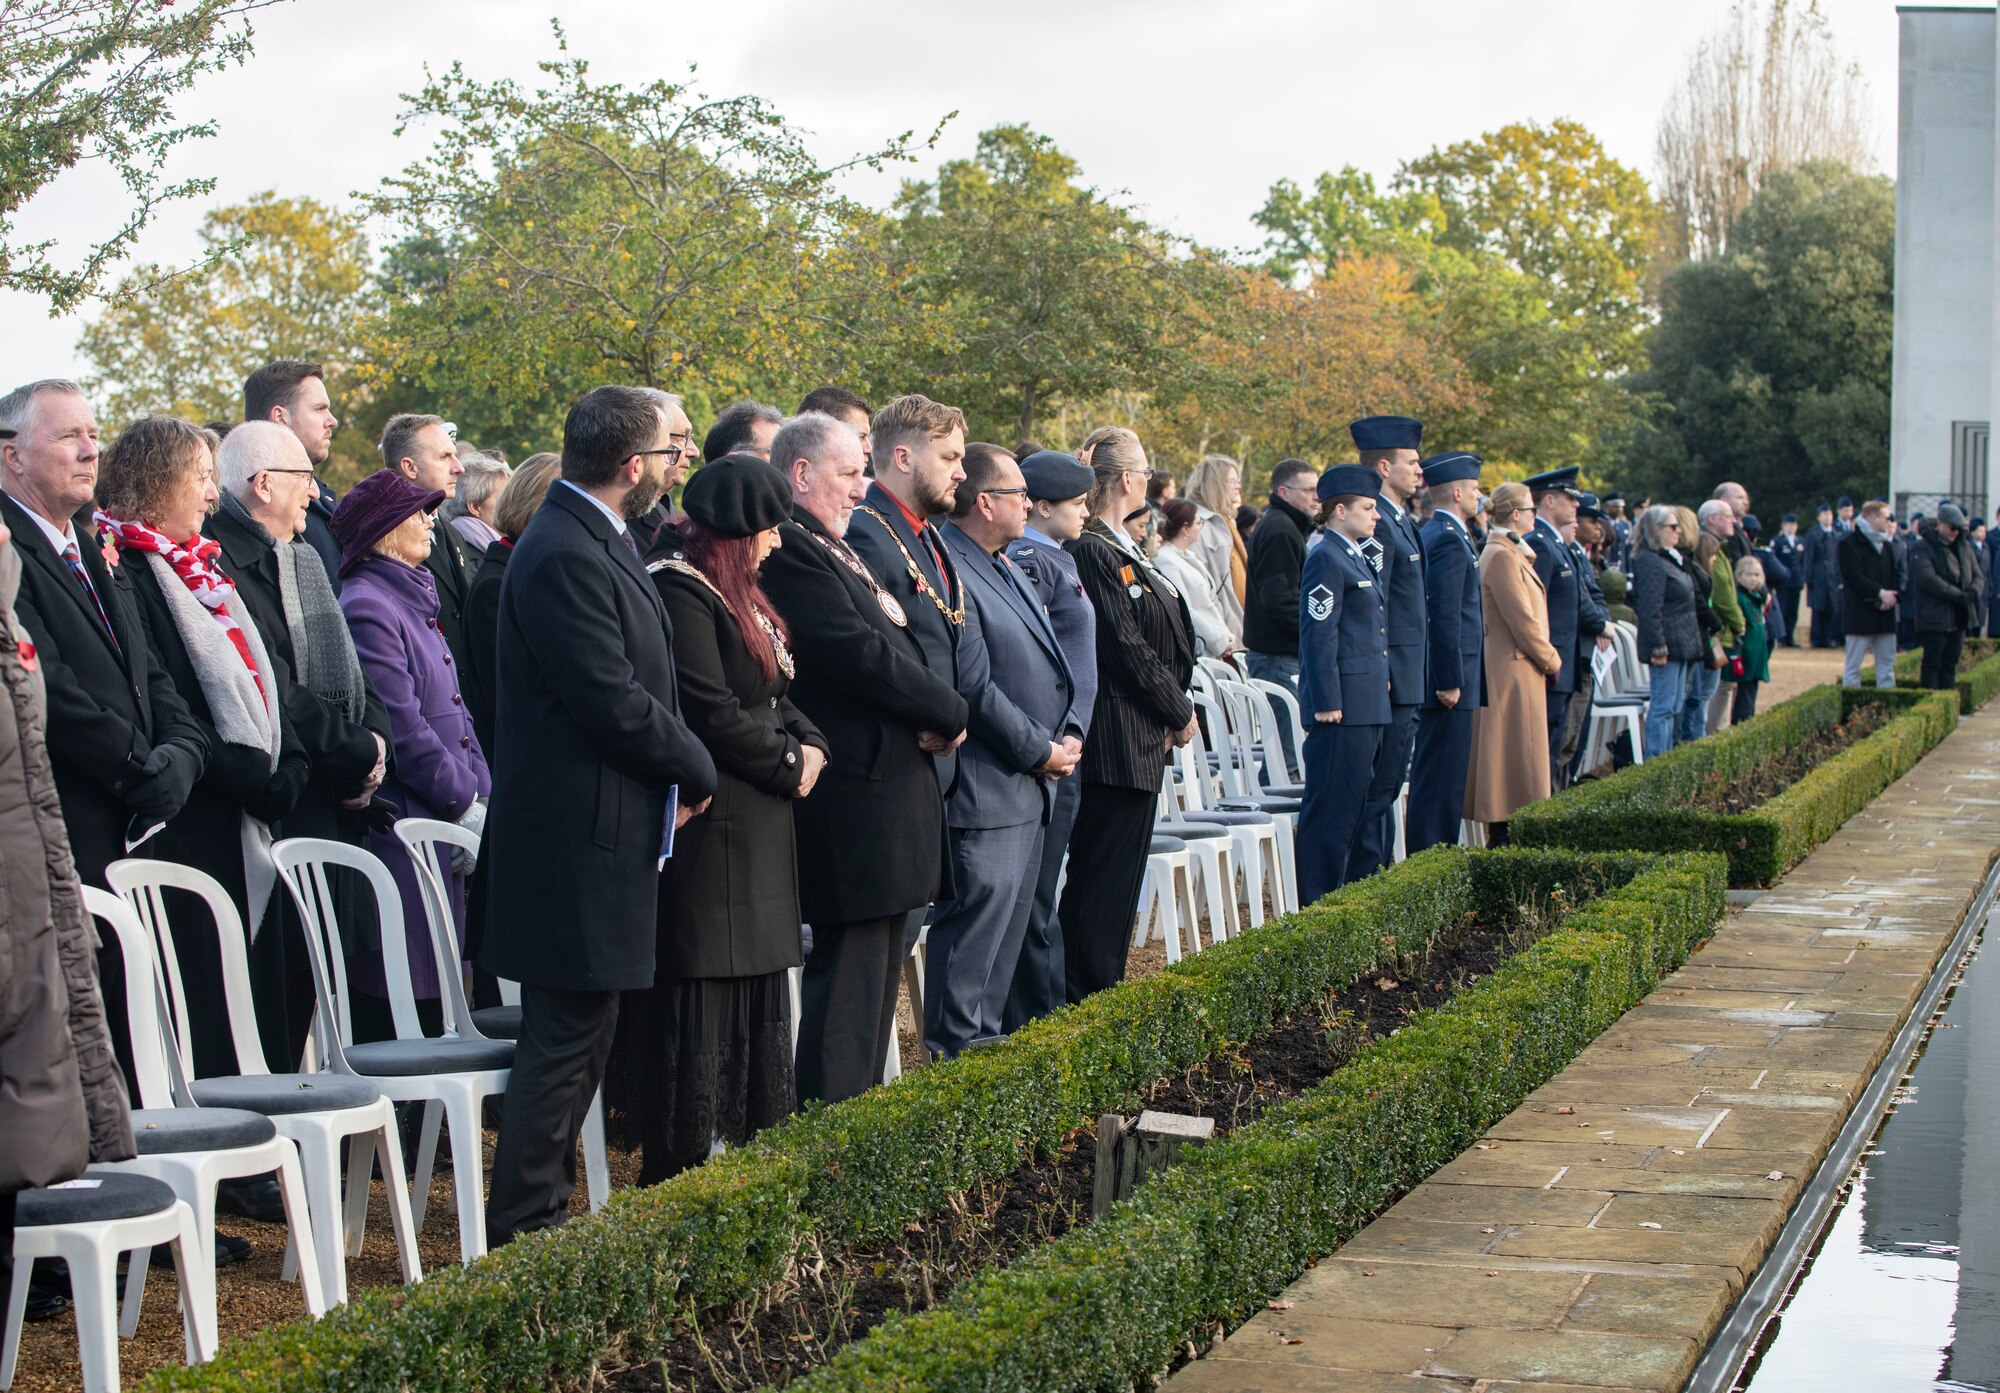 Attendees of the 501st Combat Support Wing’s Veterans Day ceremony listen to Taps being played at the Cambridge American Cemetery and Memorial, England